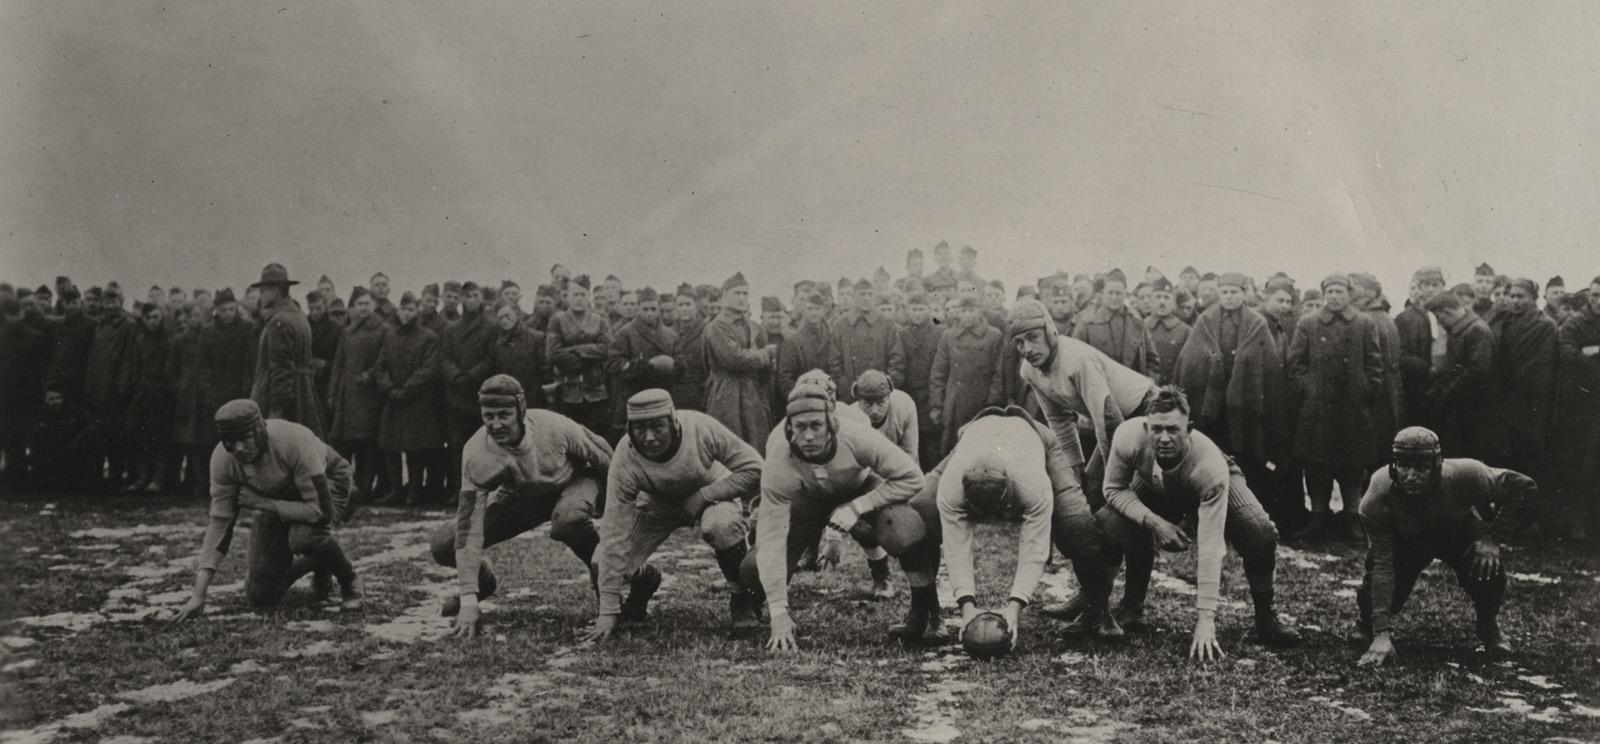 Black and white photograph of football players in an offensive formation